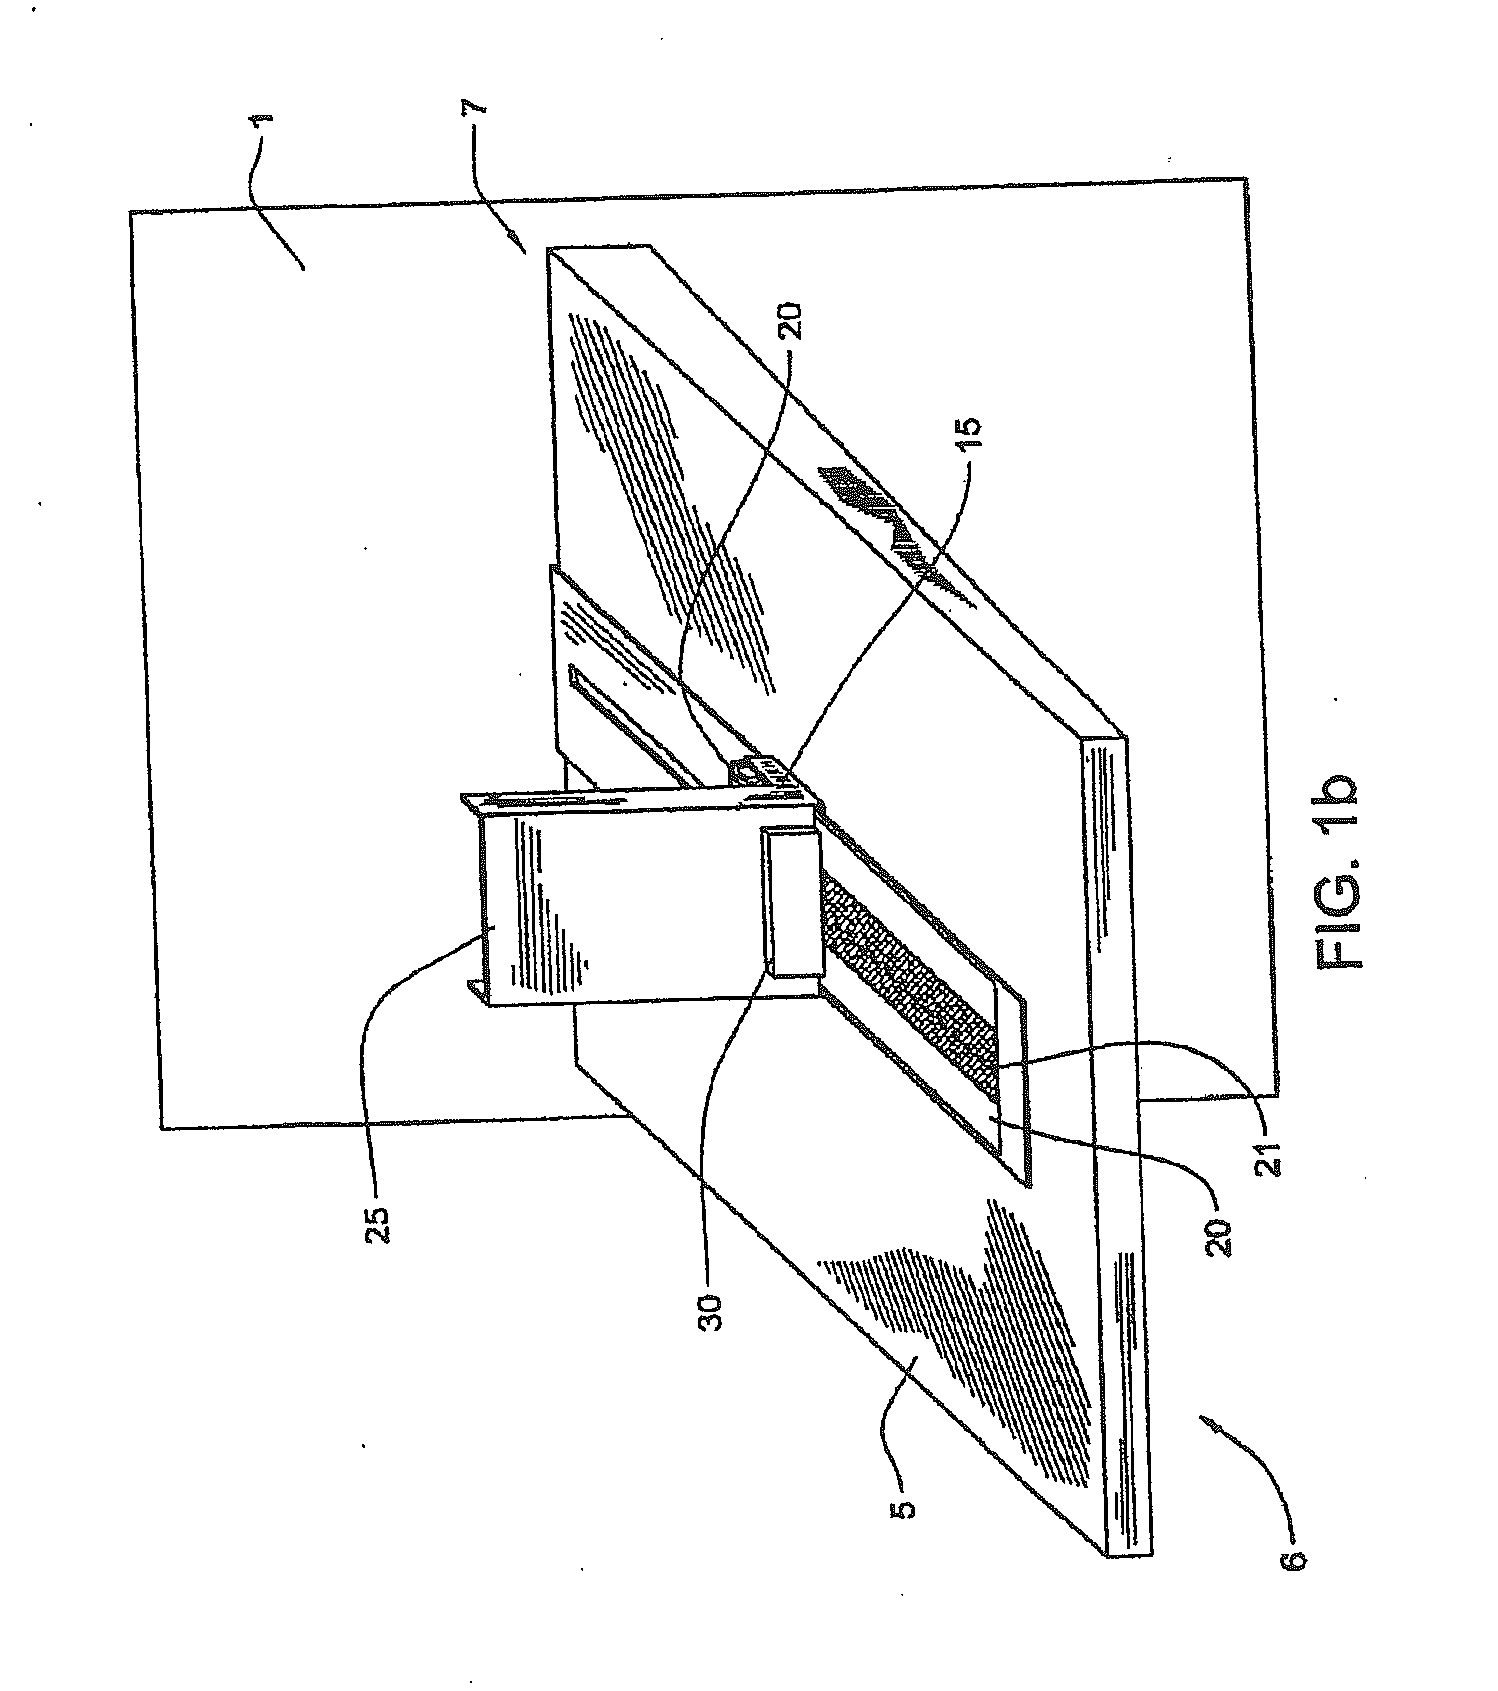 Systems and Methods for Merchandizing Electronic Displays